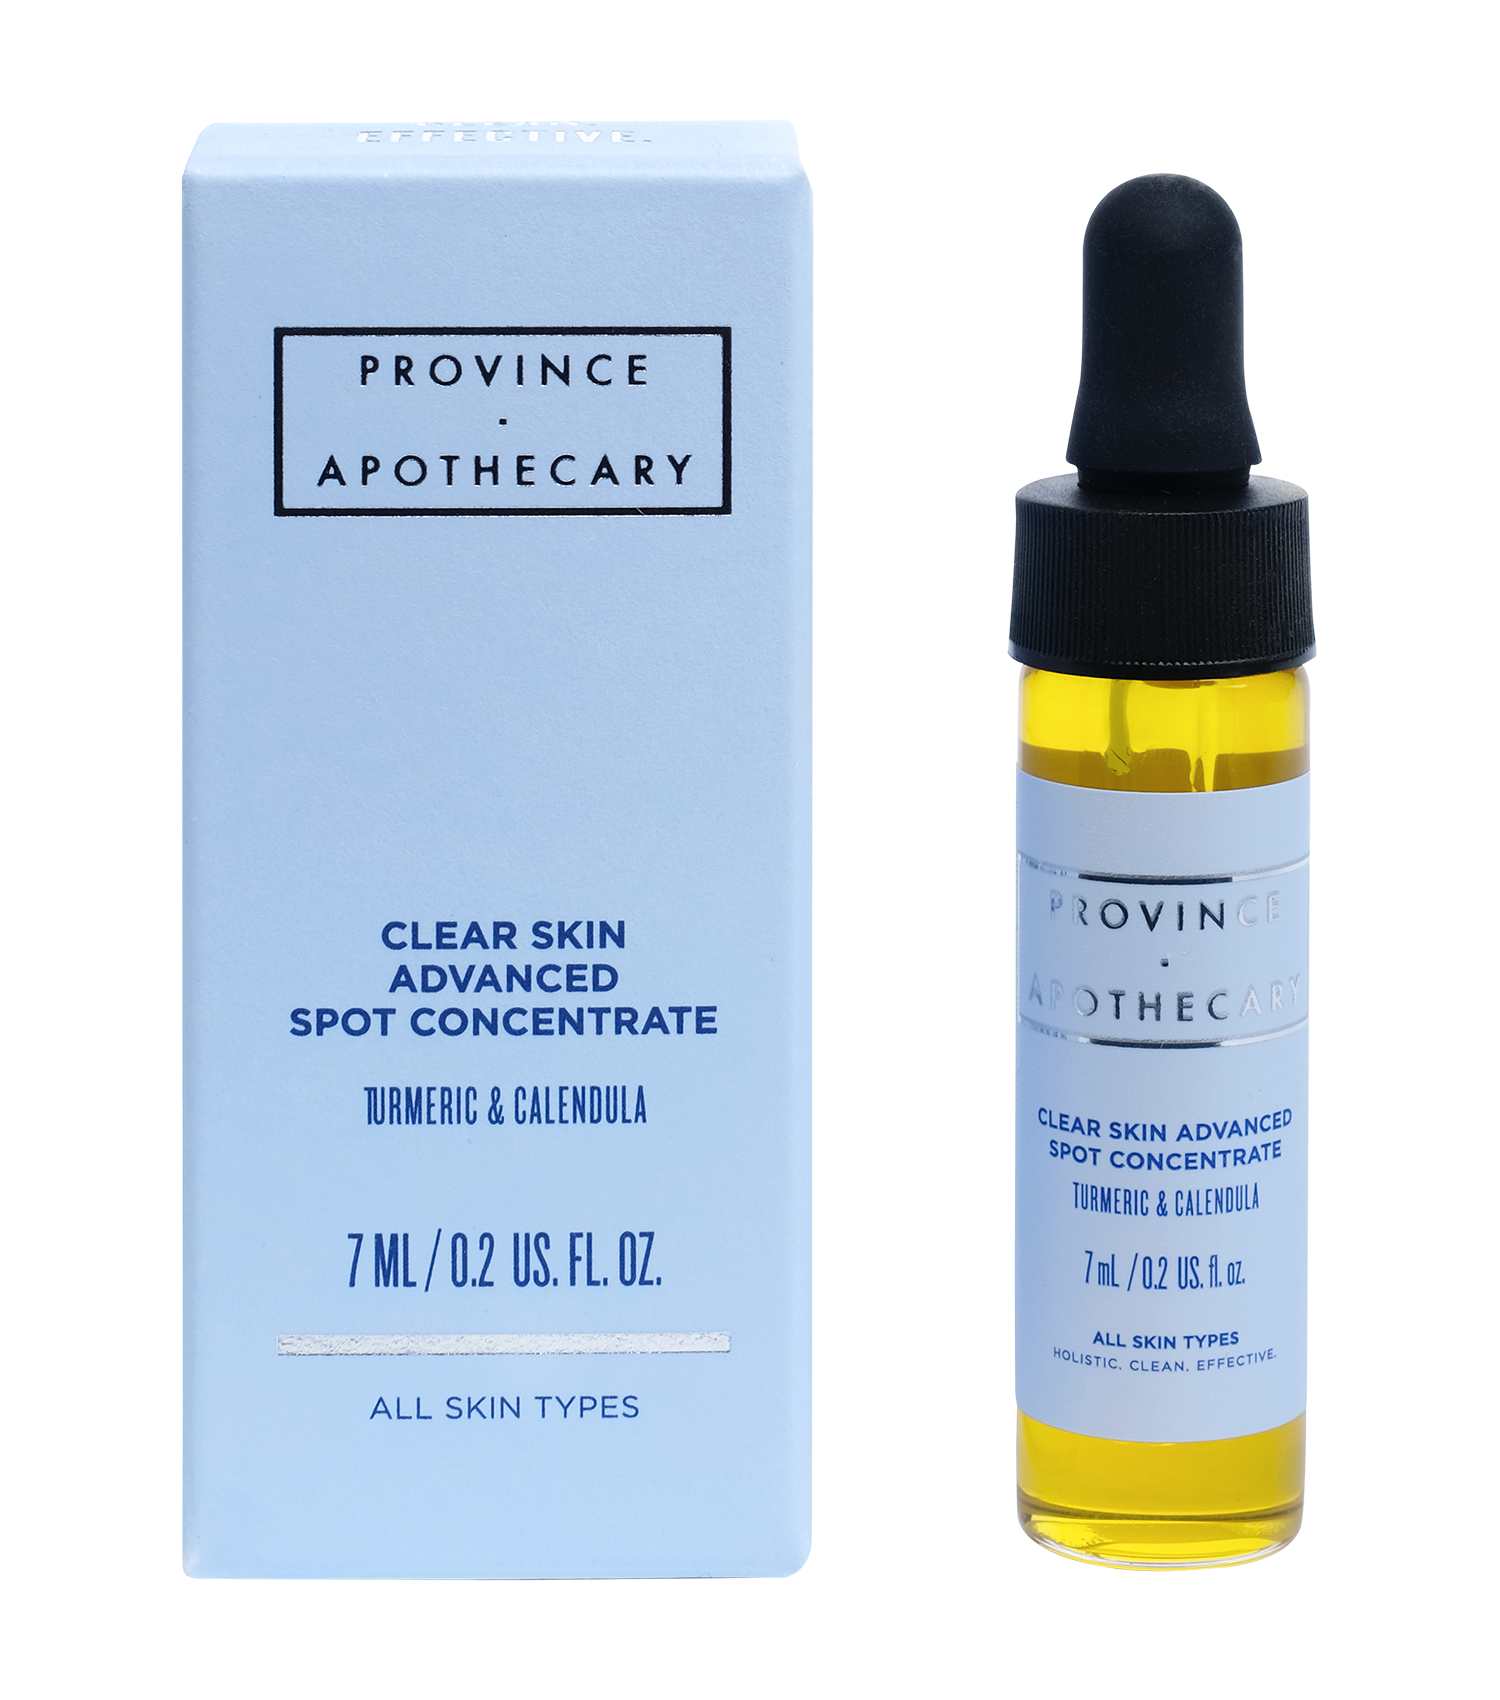 Province Apothecary CLEAR SKIN ADVANCED SPOT CONCENTRATE Province Apothecary CLEAR SKIN ADVANCED SPOT CONCENTRATE 1